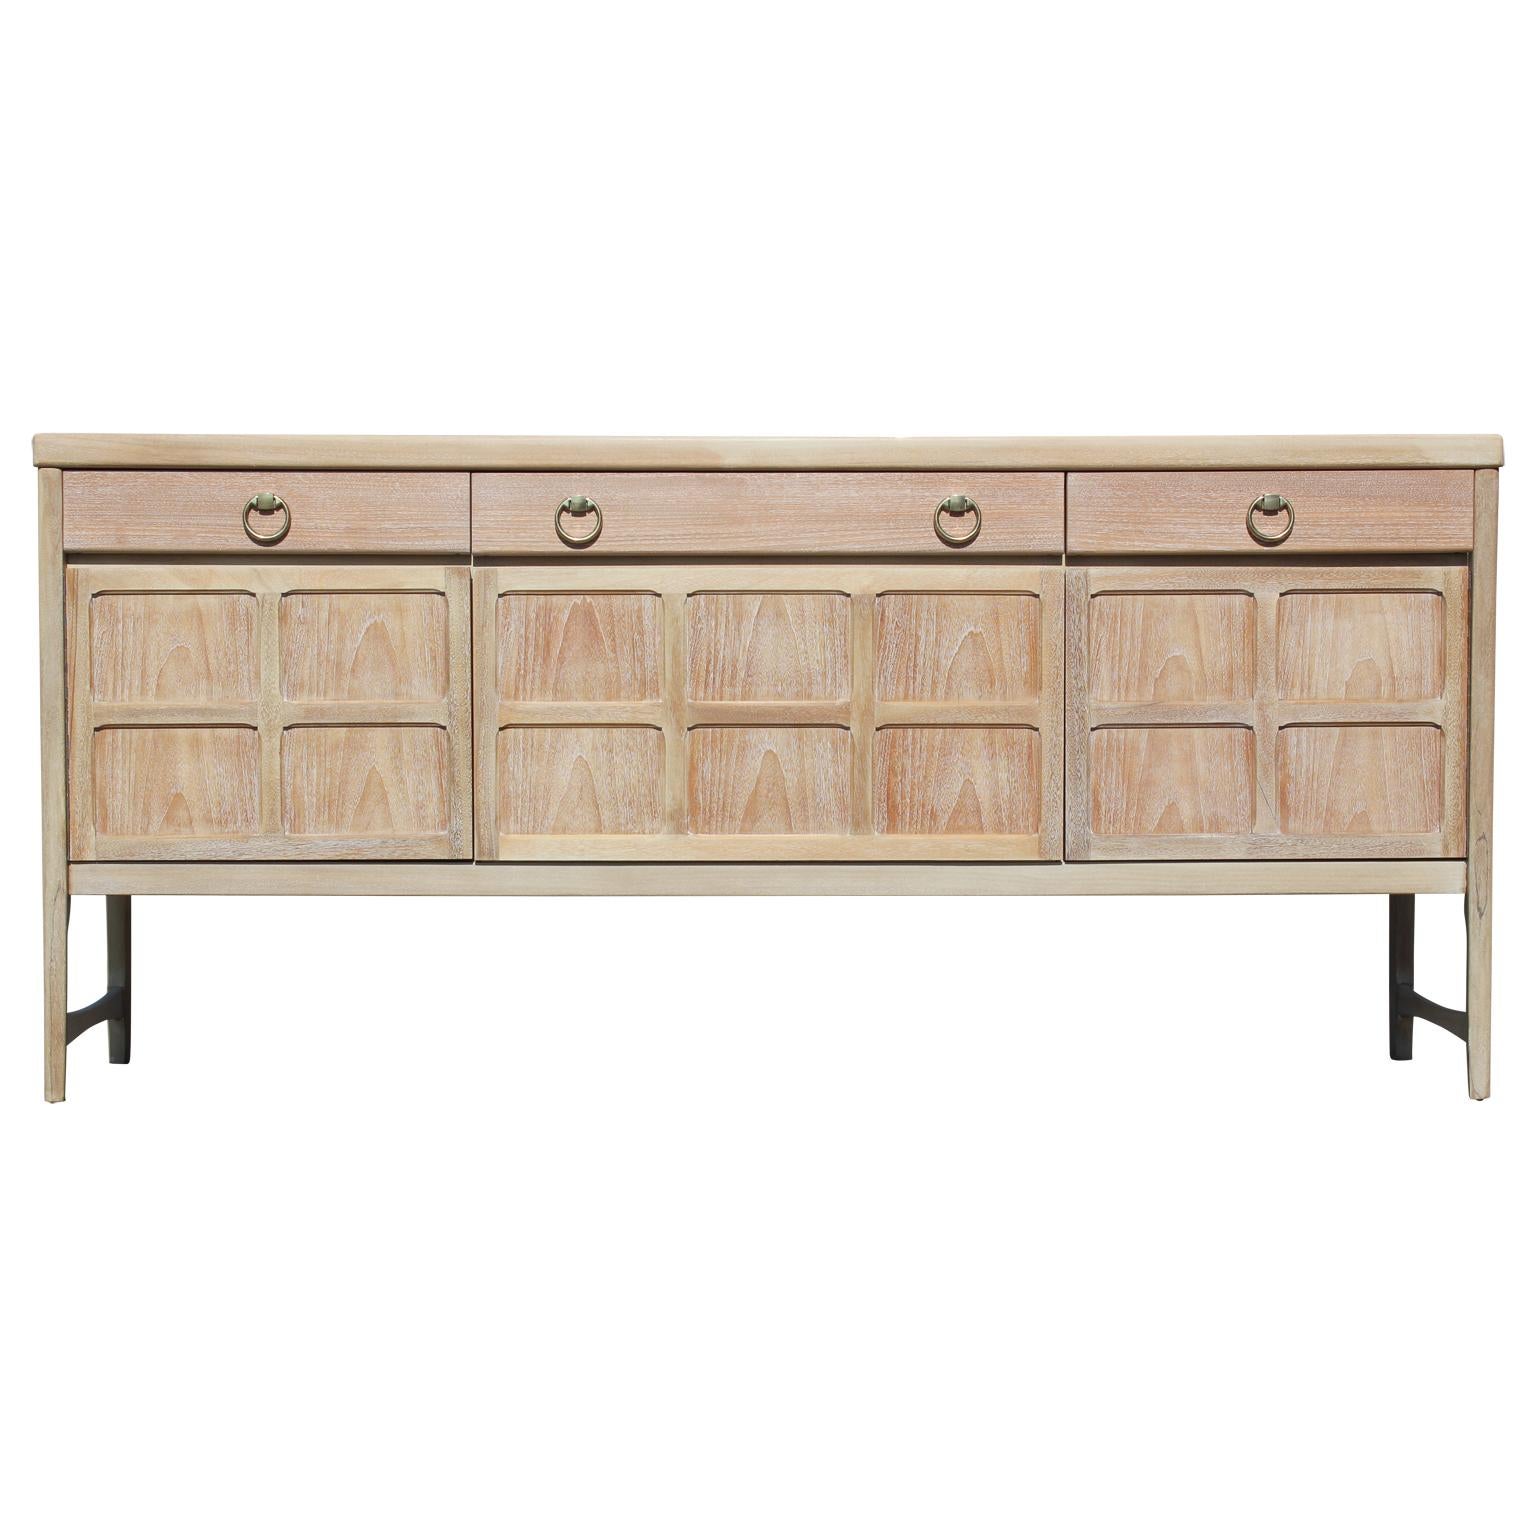 Lovely sophisticated sideboard with brass ring handles freshly restored to its natural wood finish. Centre cabinet drops down. Three drawers provide additional storage.